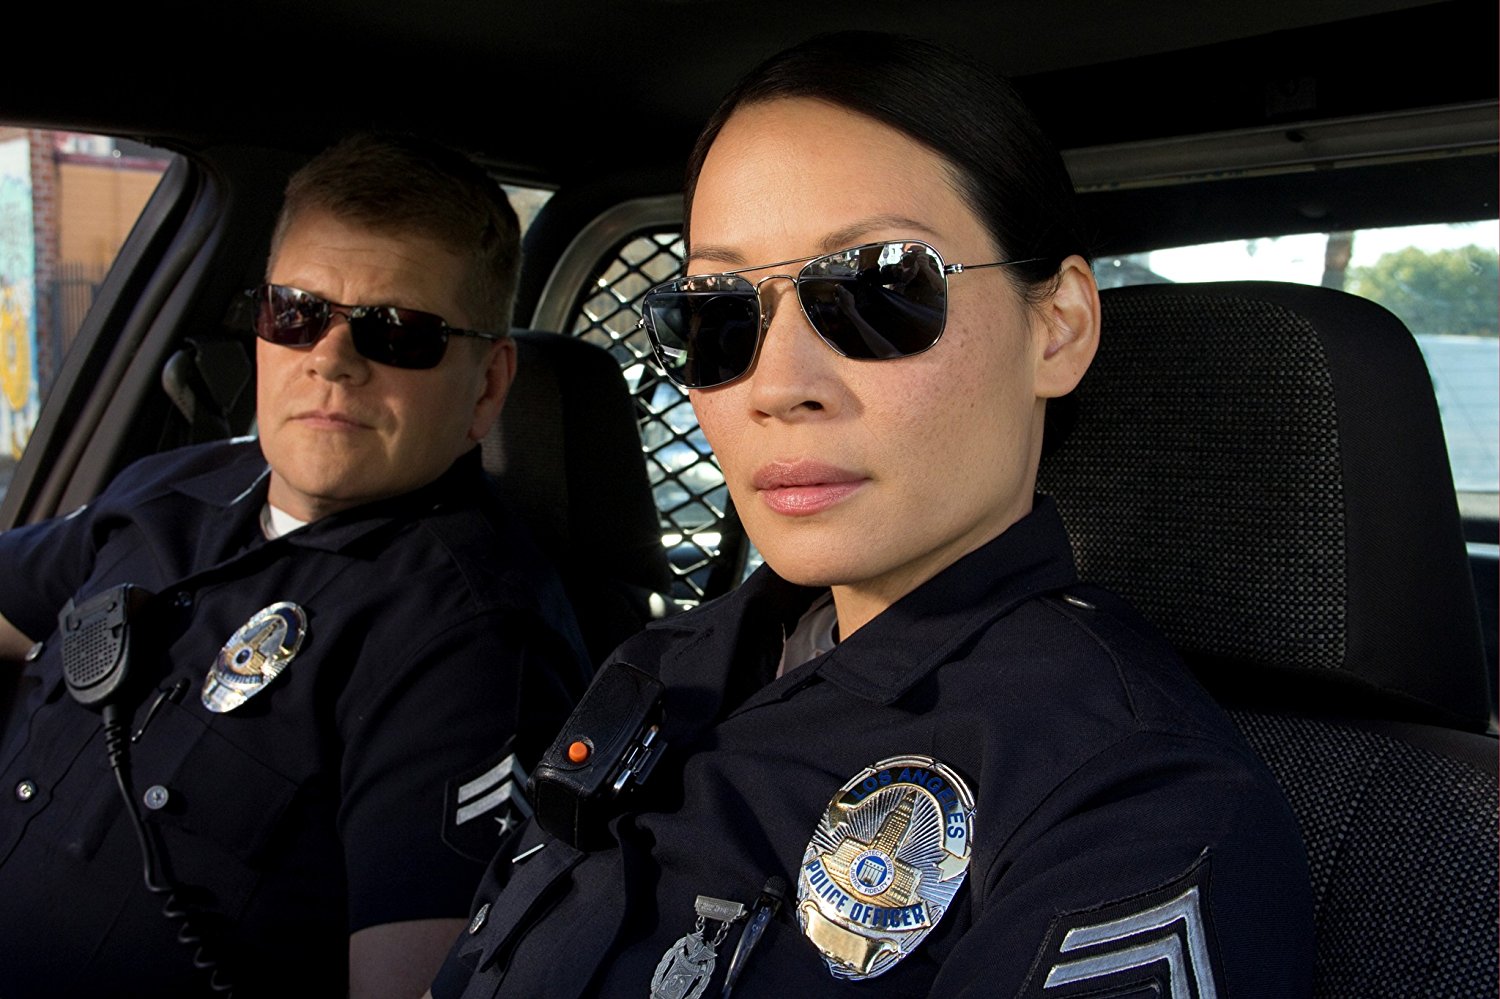 Officer Jessica Tang